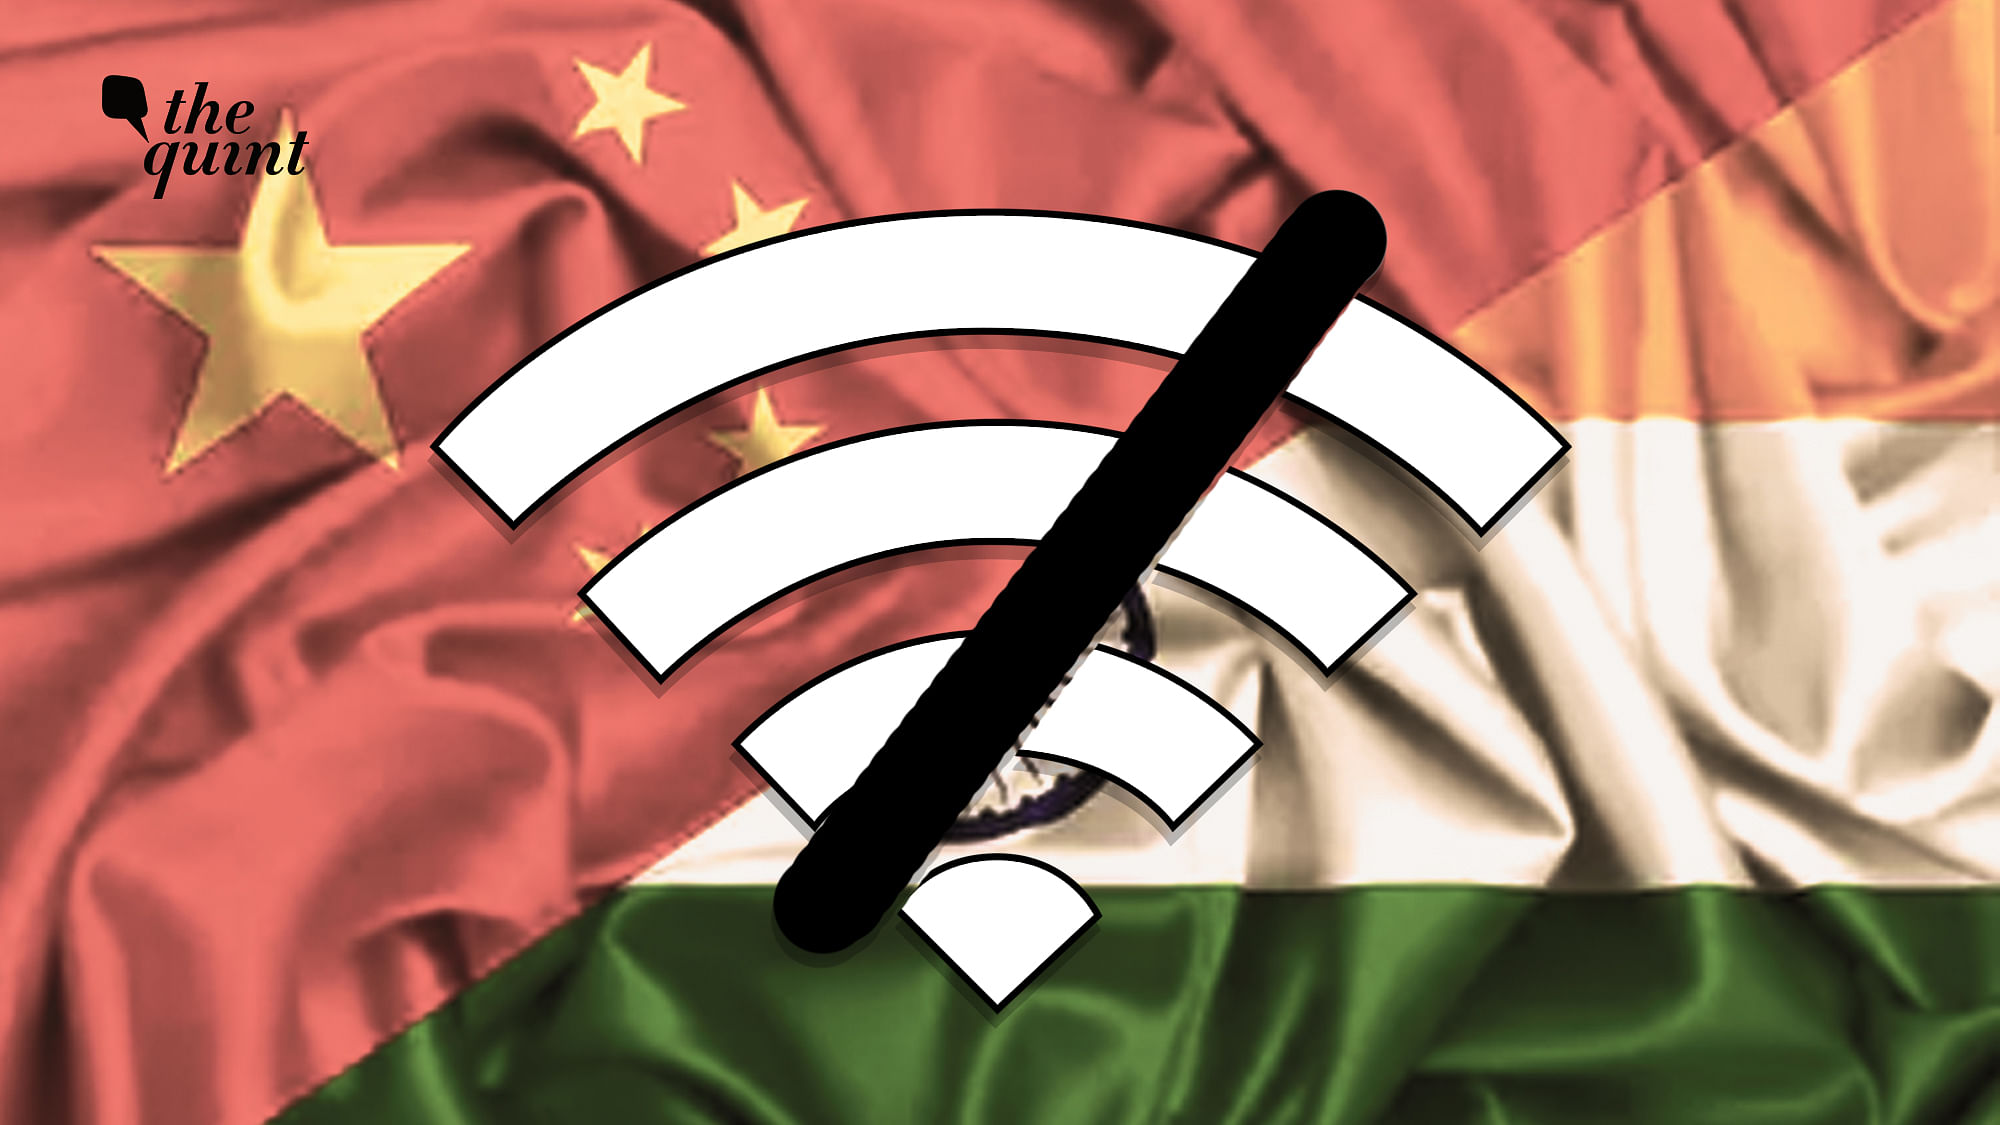 Chinese state media has lent support for India’s internet shutdown policies.